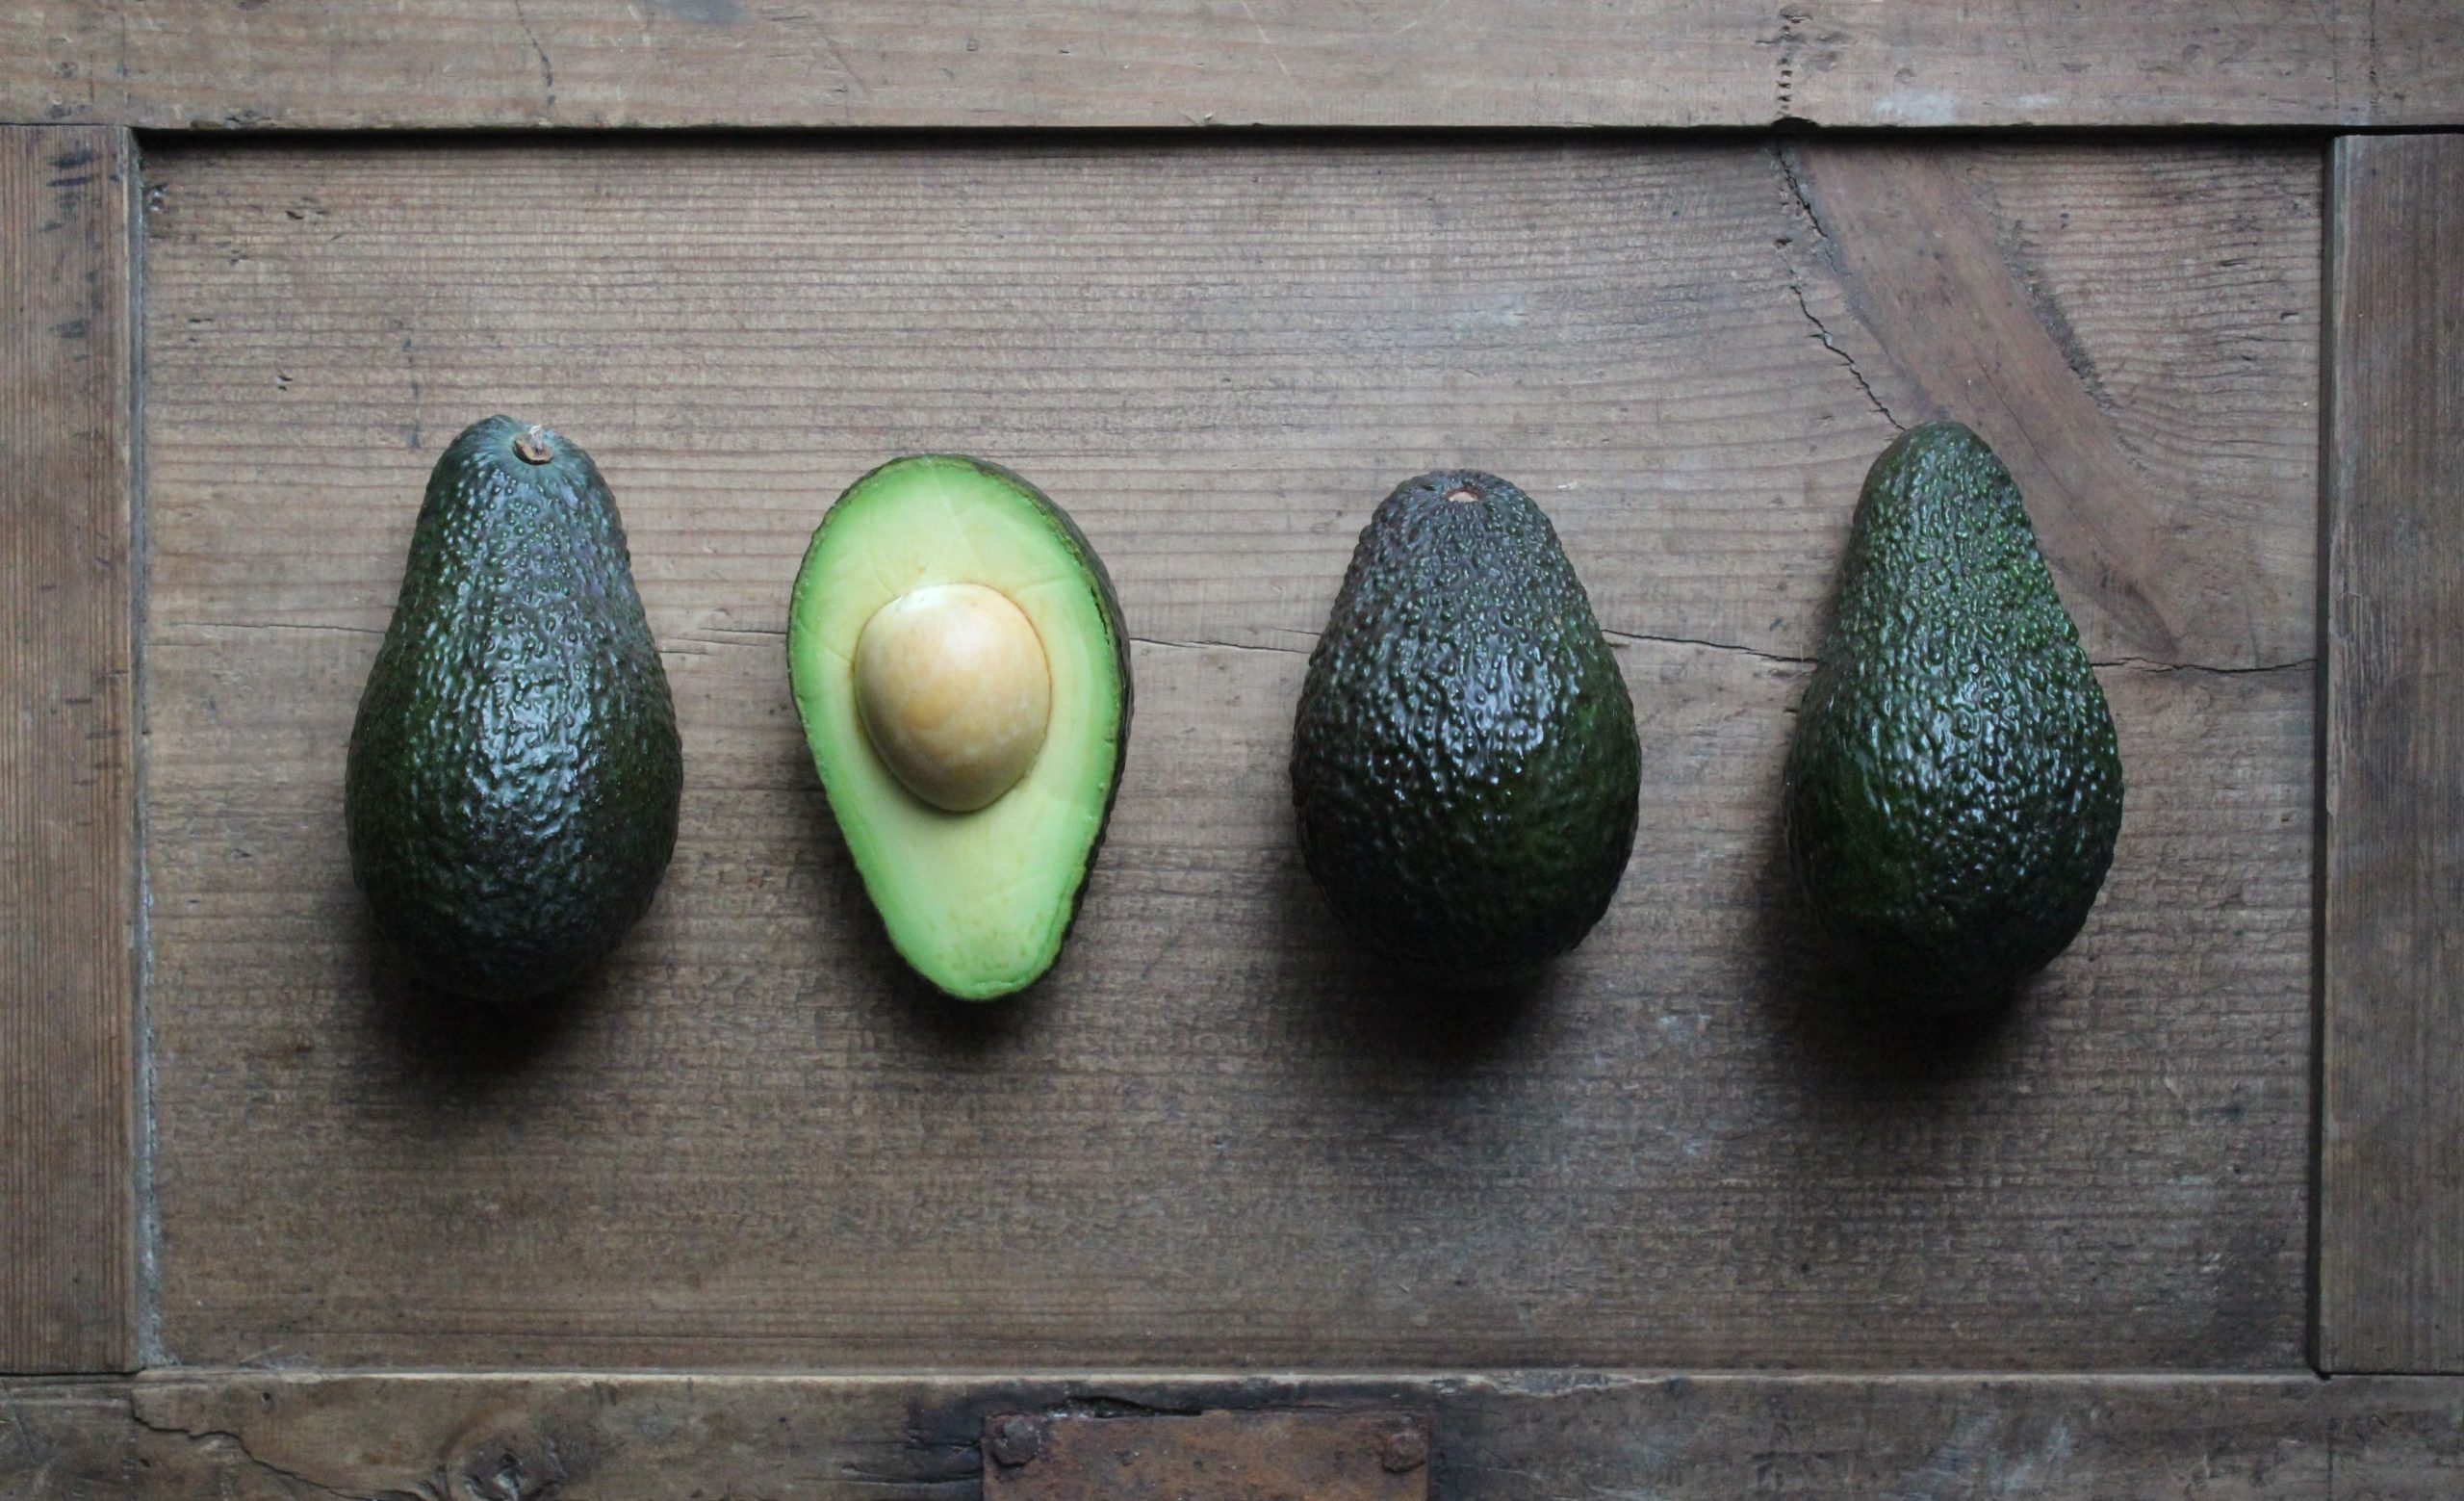 One half, upturned avocado among a trio of unopened avocados as part of an article about niche marketing.